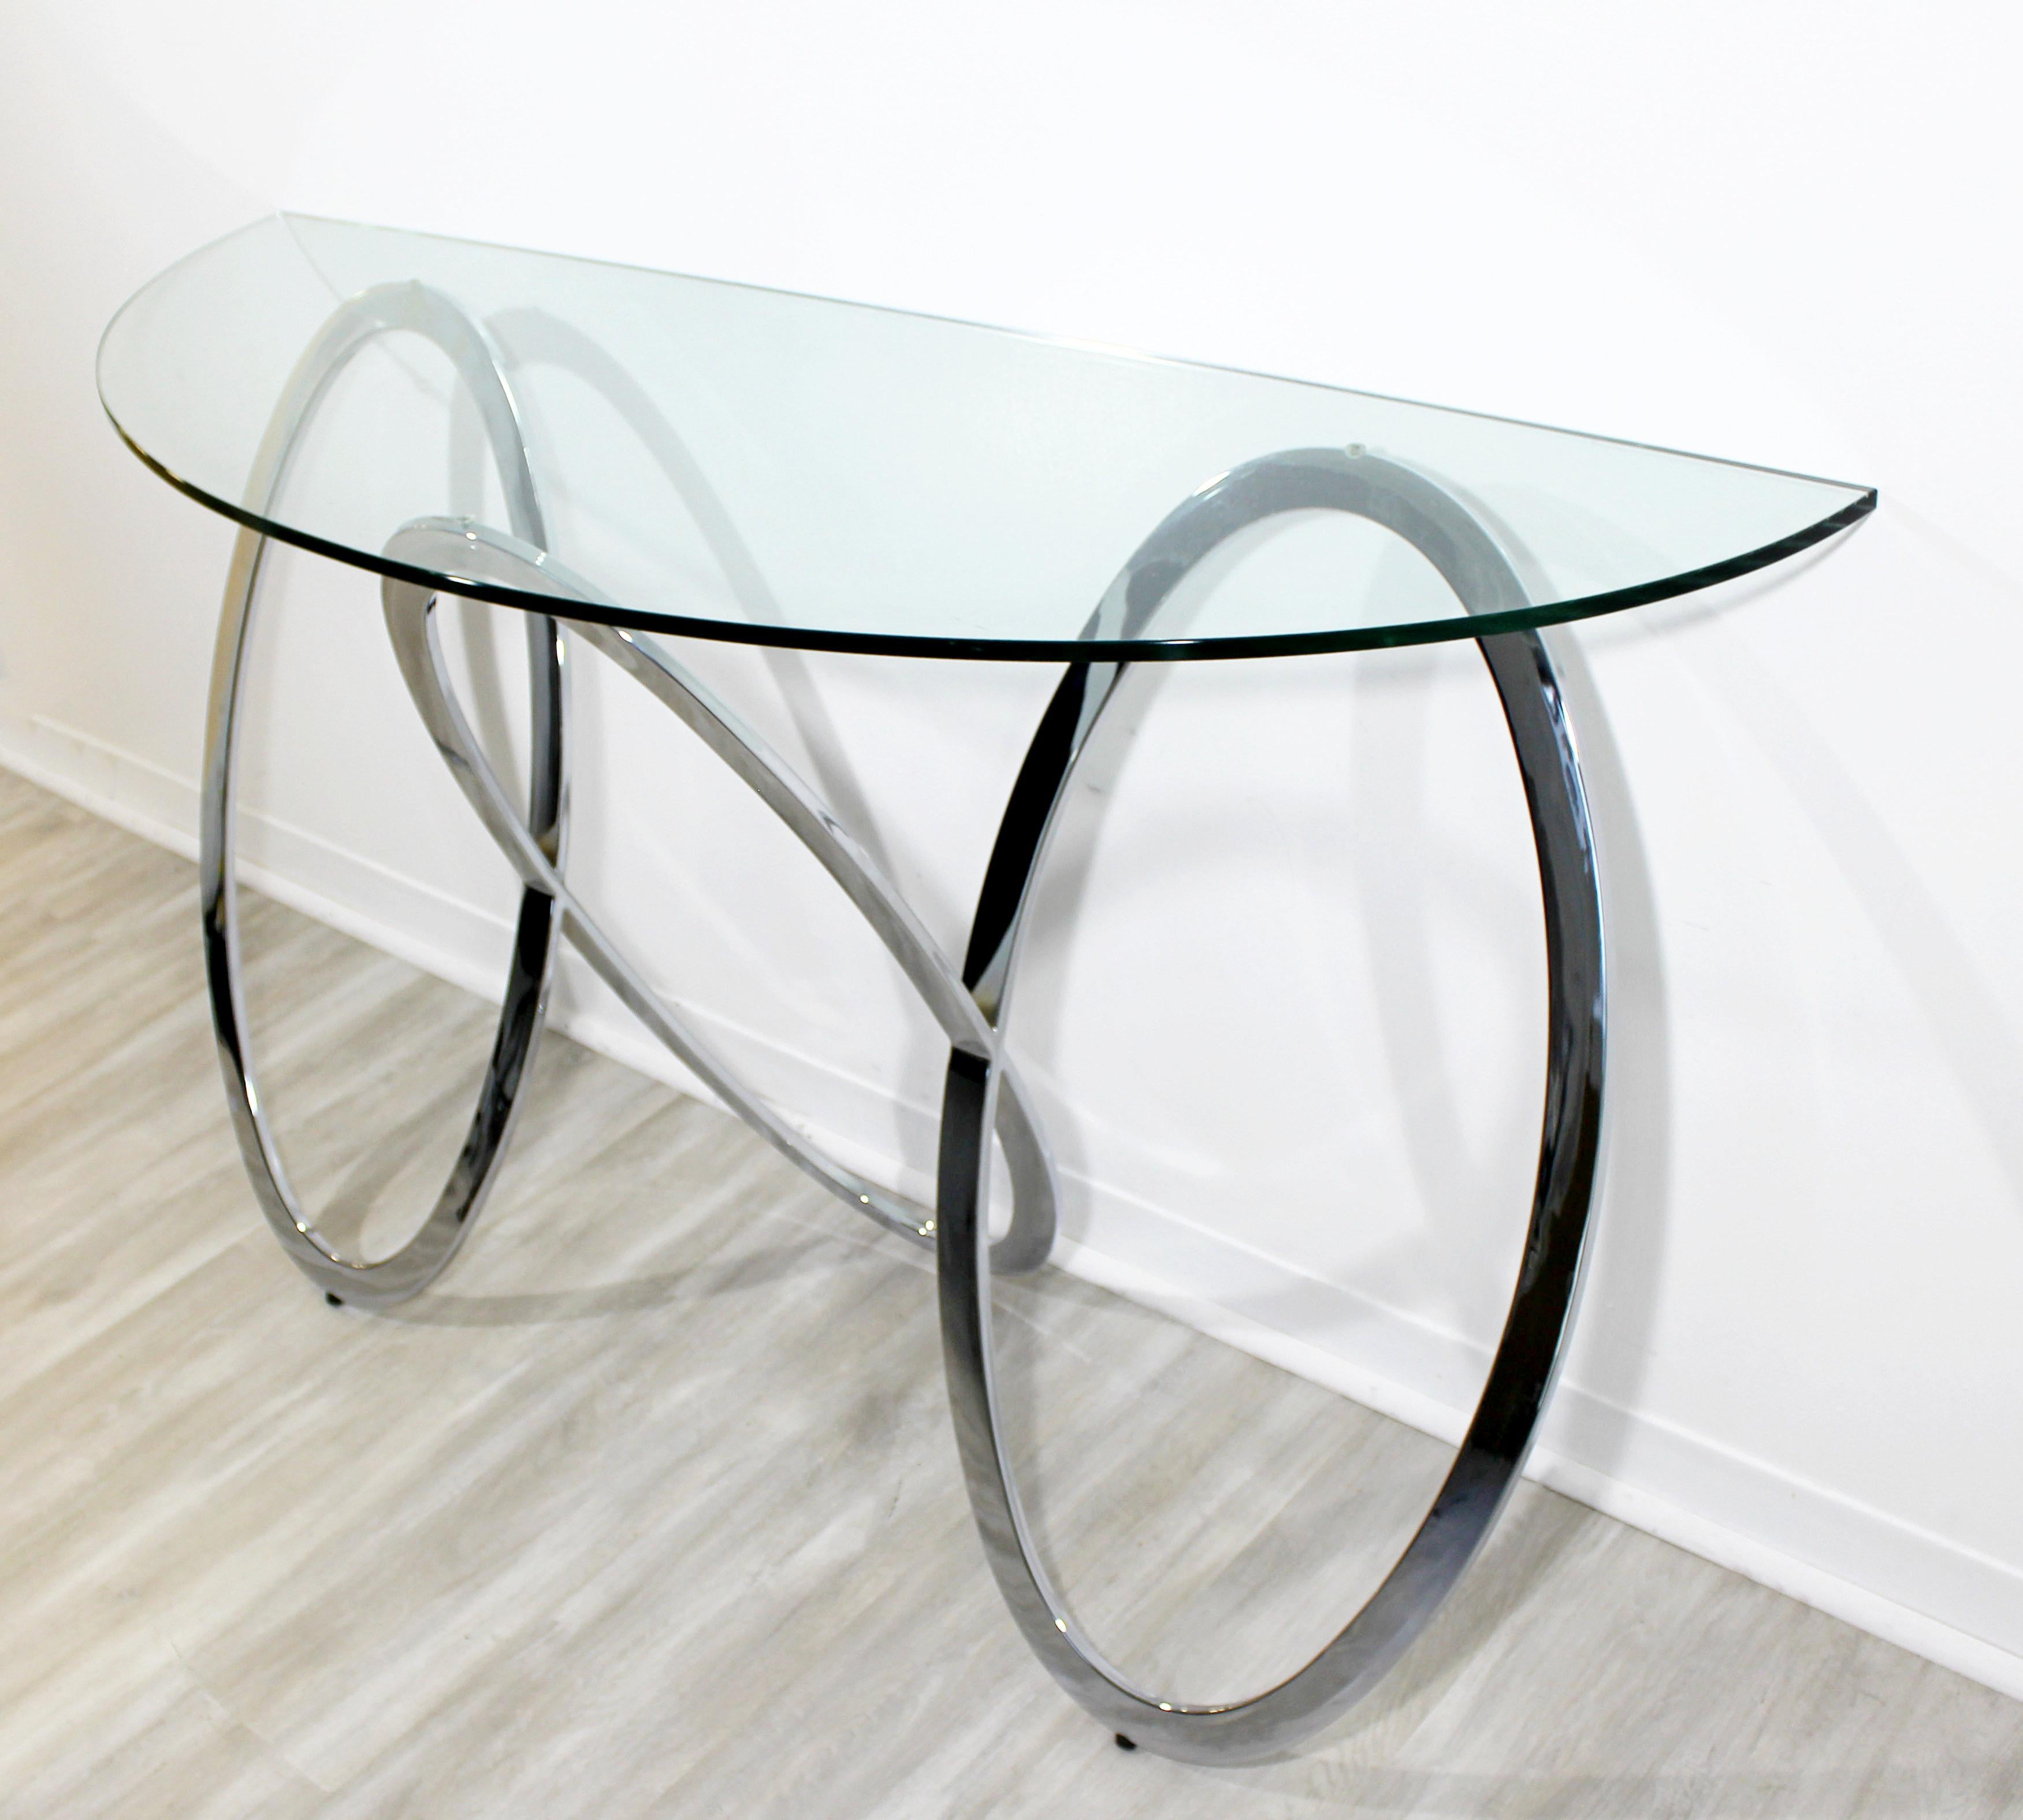 For your consideration is a unique, half-moon console table, made of chrome and glass, by Milo Baughman, circa 1970s. Base is in excellent condition, but the glass has a large chip, close up in photos. The dimensions are 56